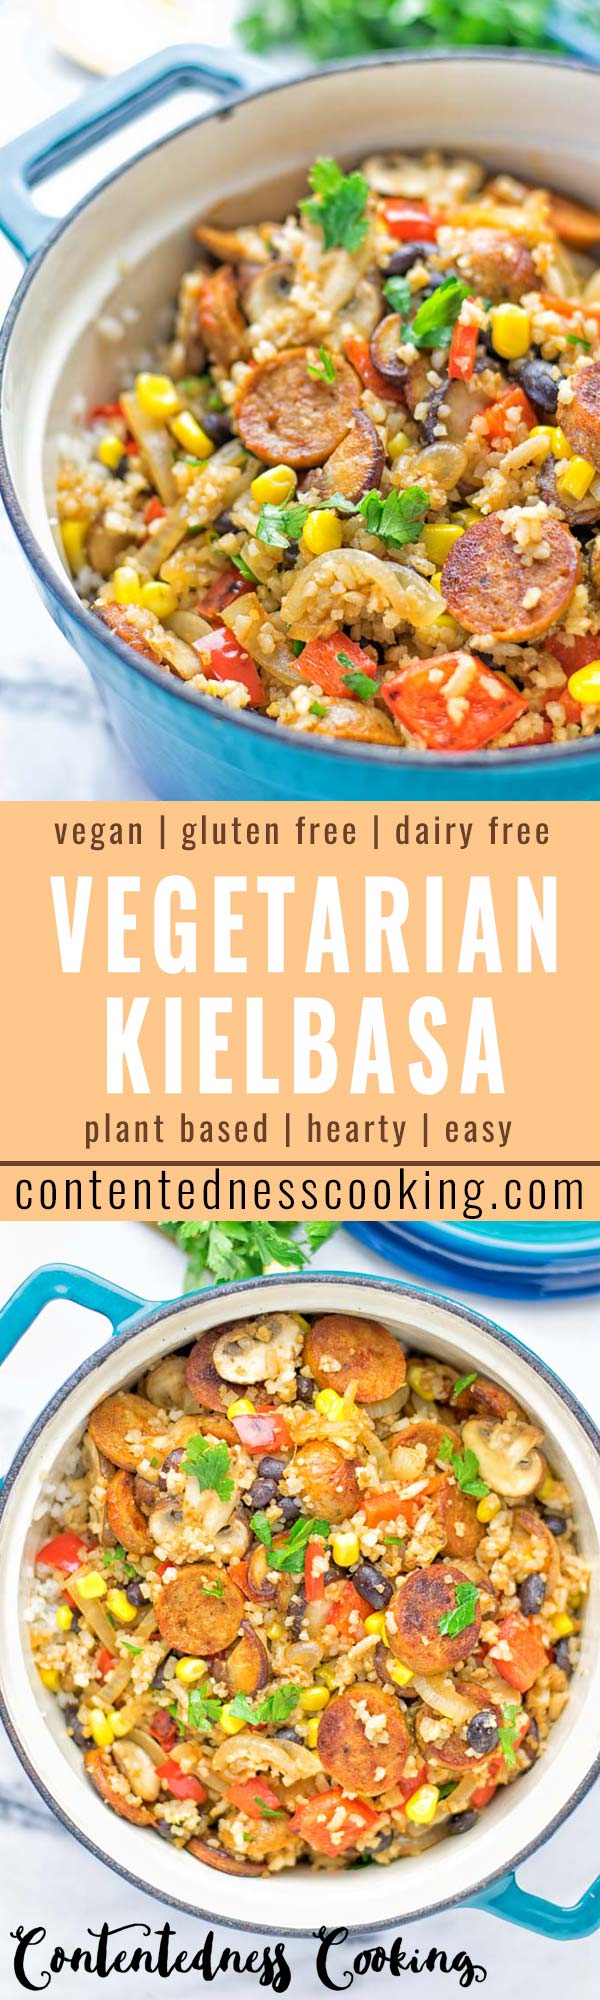 This Vegetarian Kielbasa is entirely vegan, gluten free and so delicious for lunch, dinner, meal prep and so much more. It’s a great dairy free alternative, so satisfyingly packed with amazing flavors for everyone. Come and try it now, enjoy the best comfort food the whole family will love. #vegan #glutenfree #dairyfree #vegetarian #dinner #lunch #mealprep #worklunchideas #contentednesscooking #kielbasarecipes #easyfood #familymealplanning 